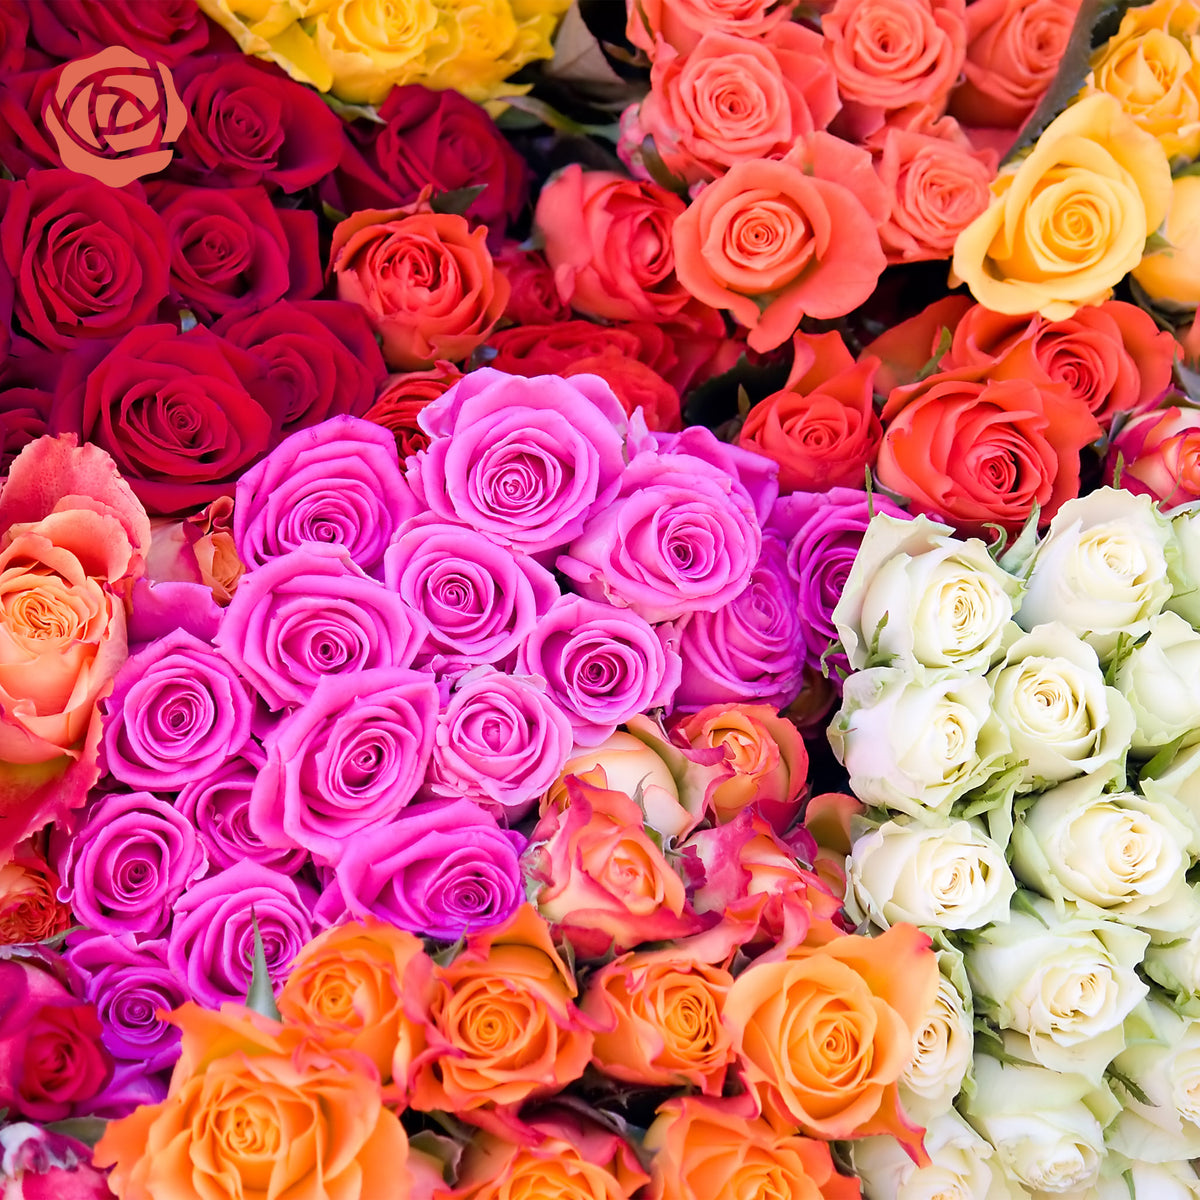 6 Beautiful Roses to Give Your Love on this Rose Day